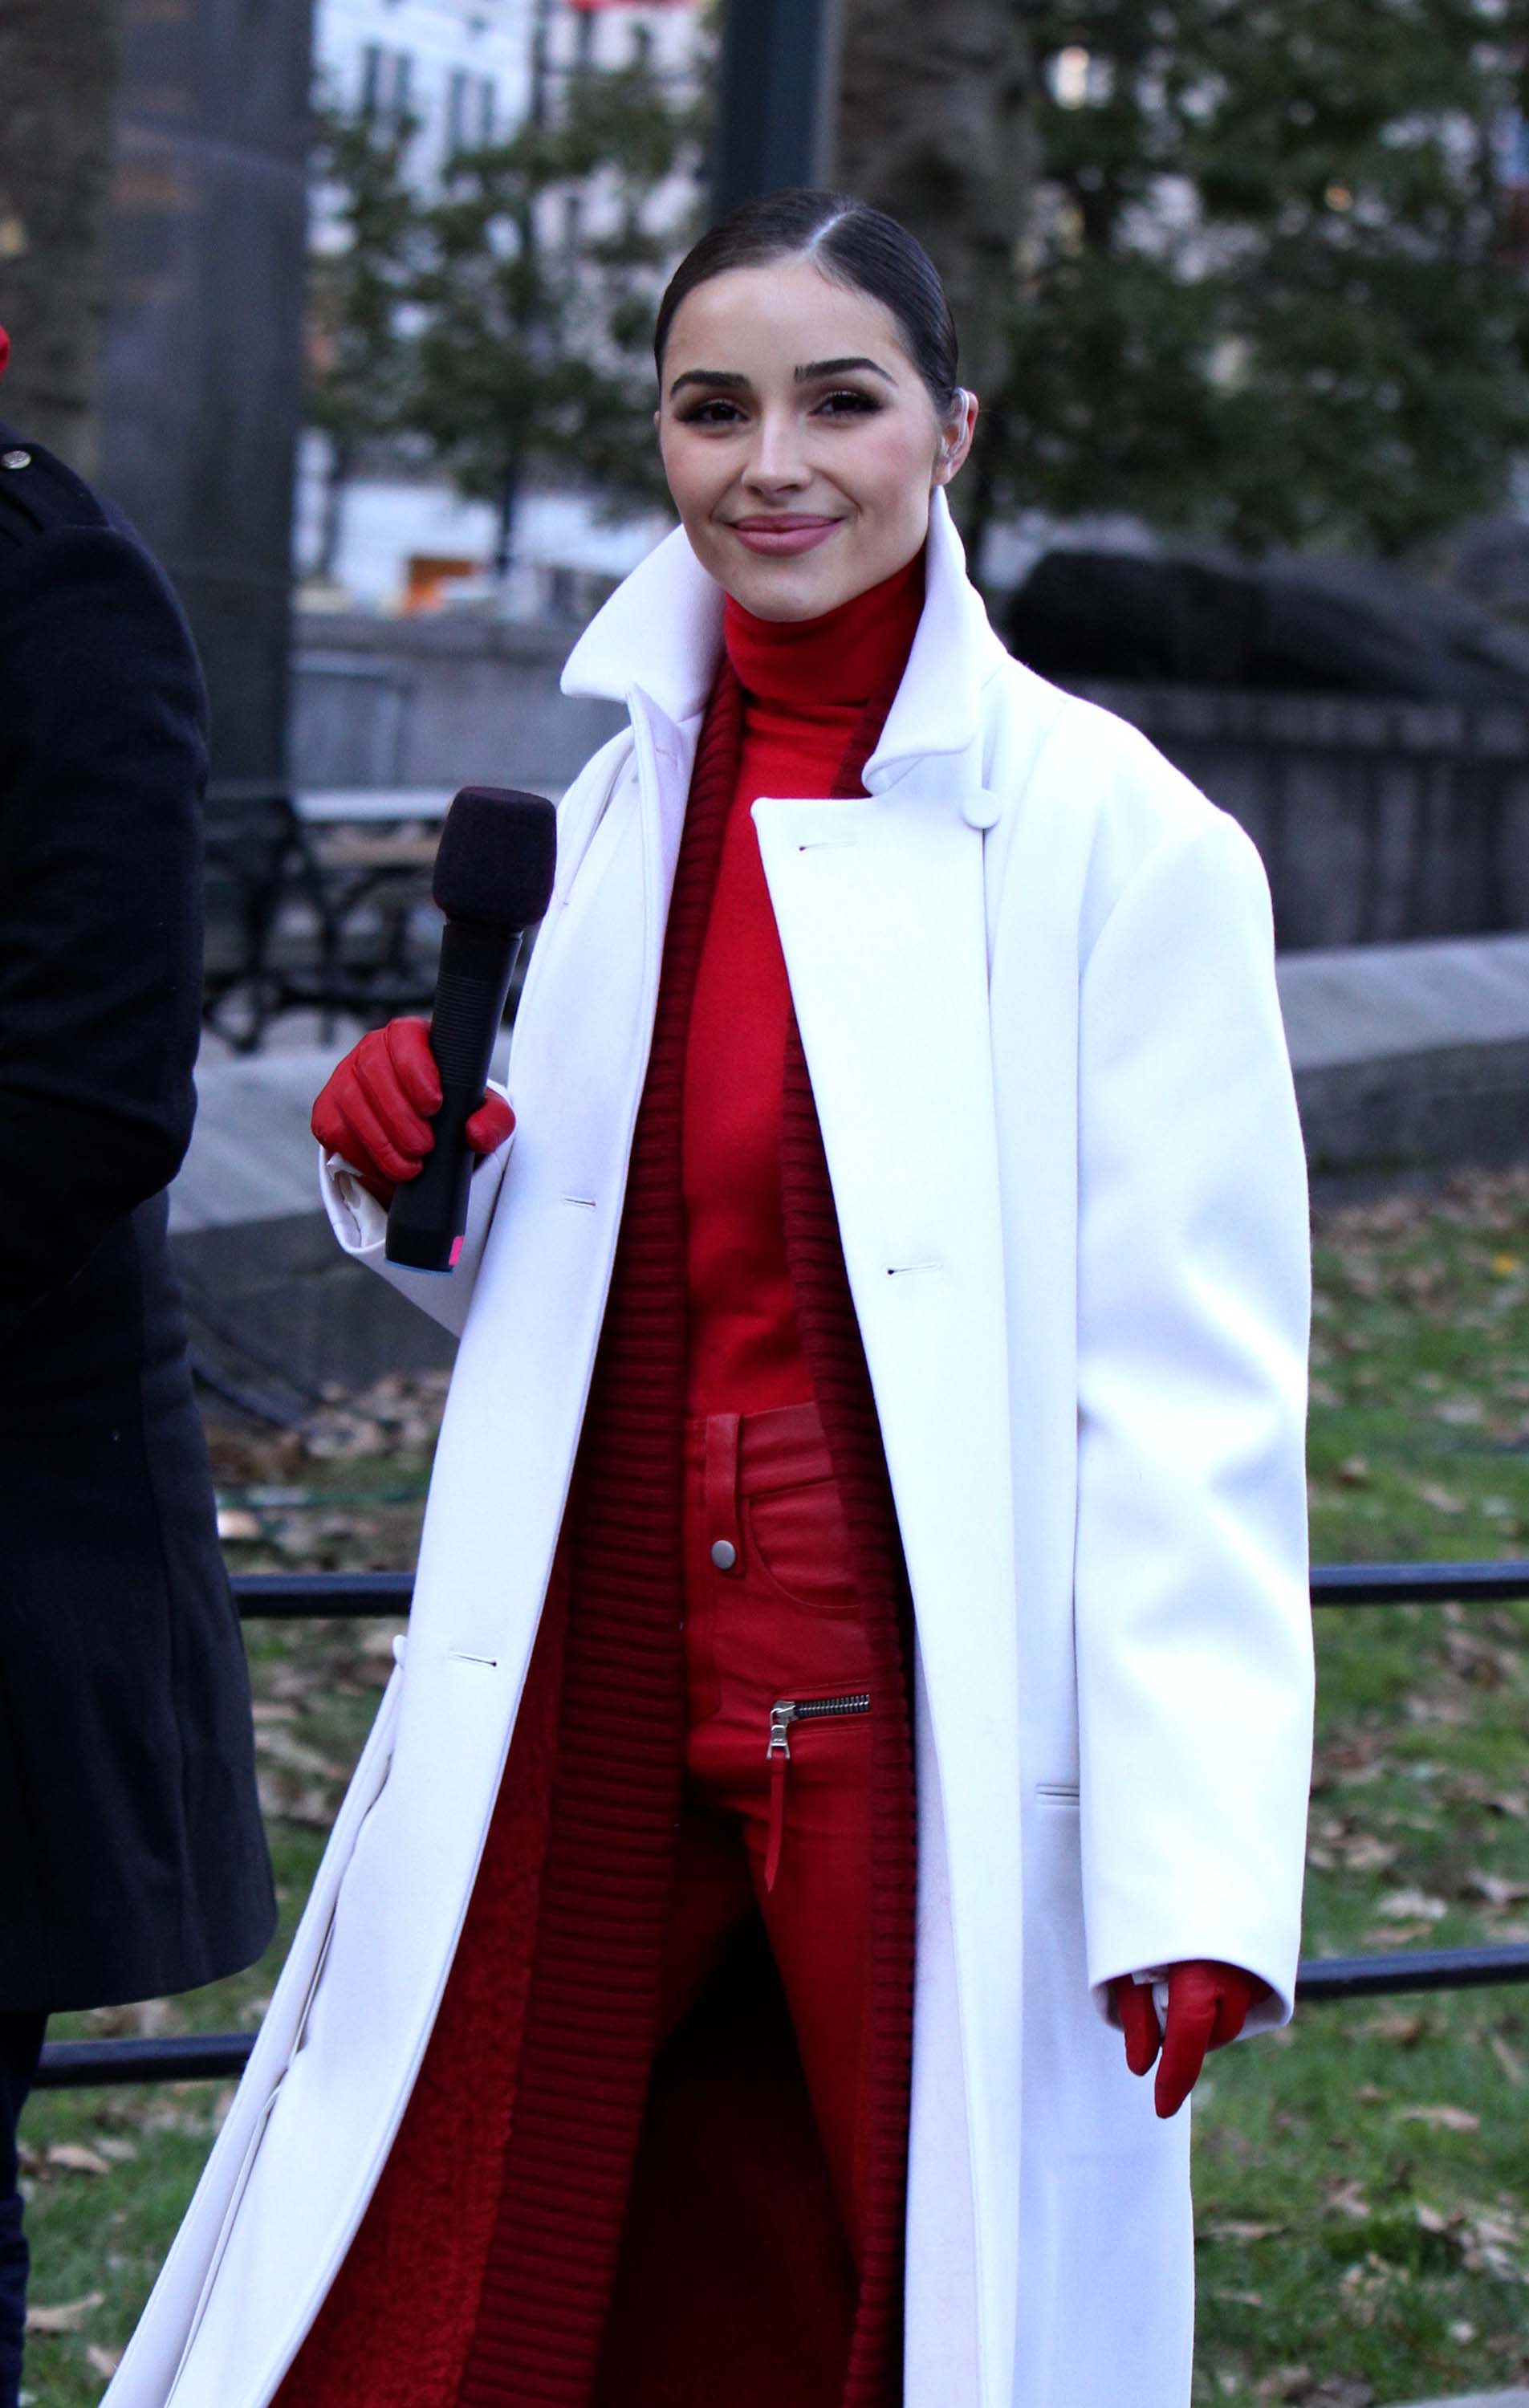 Olivia Culpo attends the Macy’s Thanksgiving Day Parade